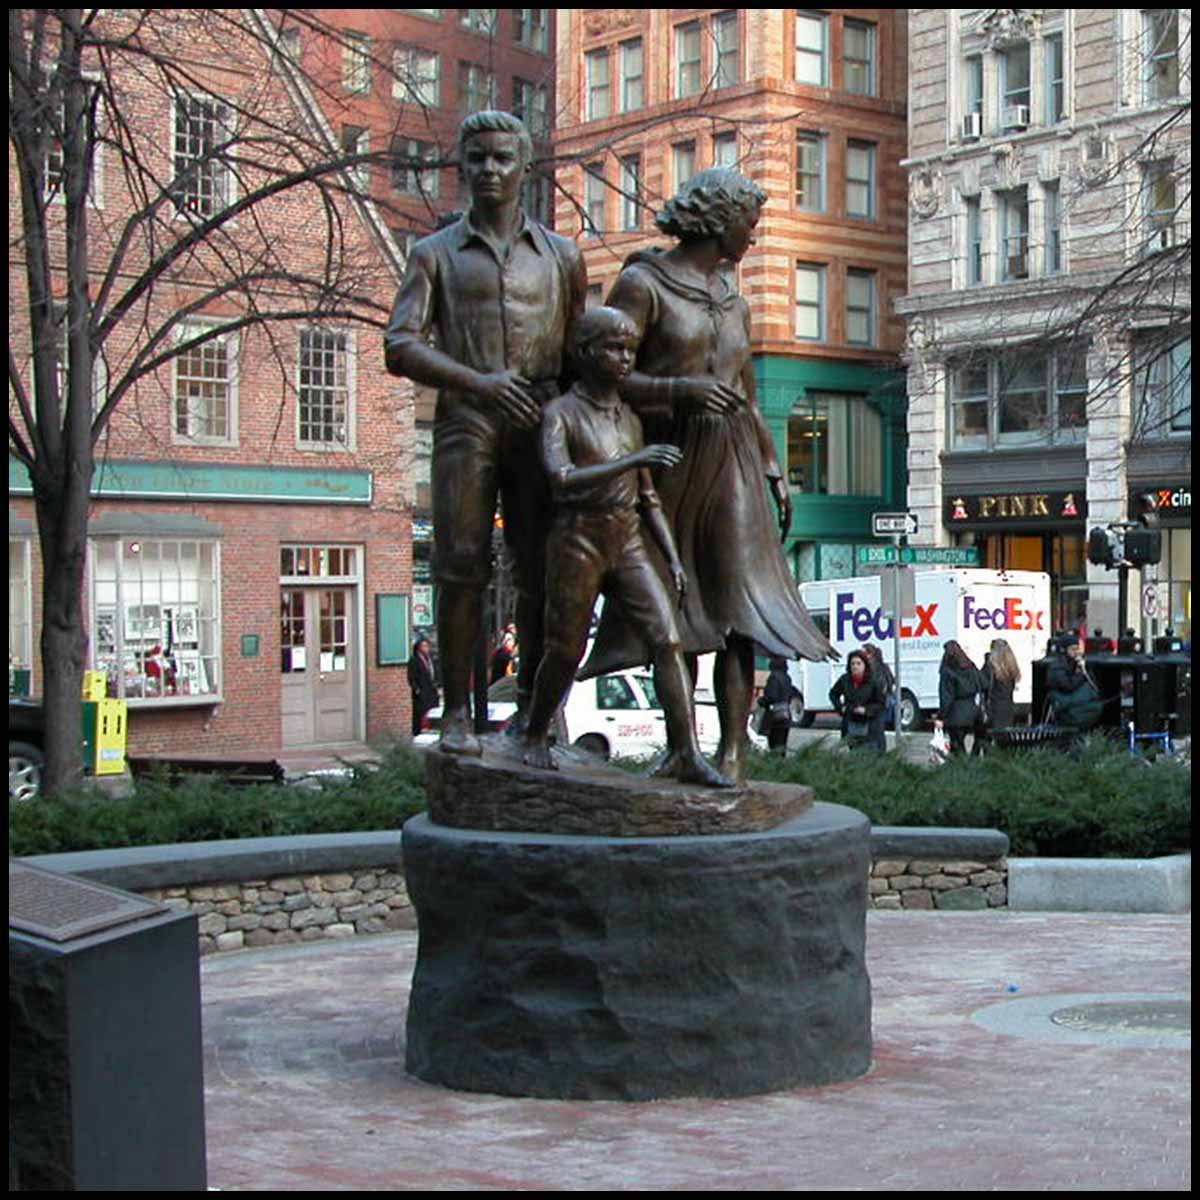 photo of bronze-colored sculpture of male, female, and child in movement on round stone base in hardscaped plaza with buildings and streets surrounding it